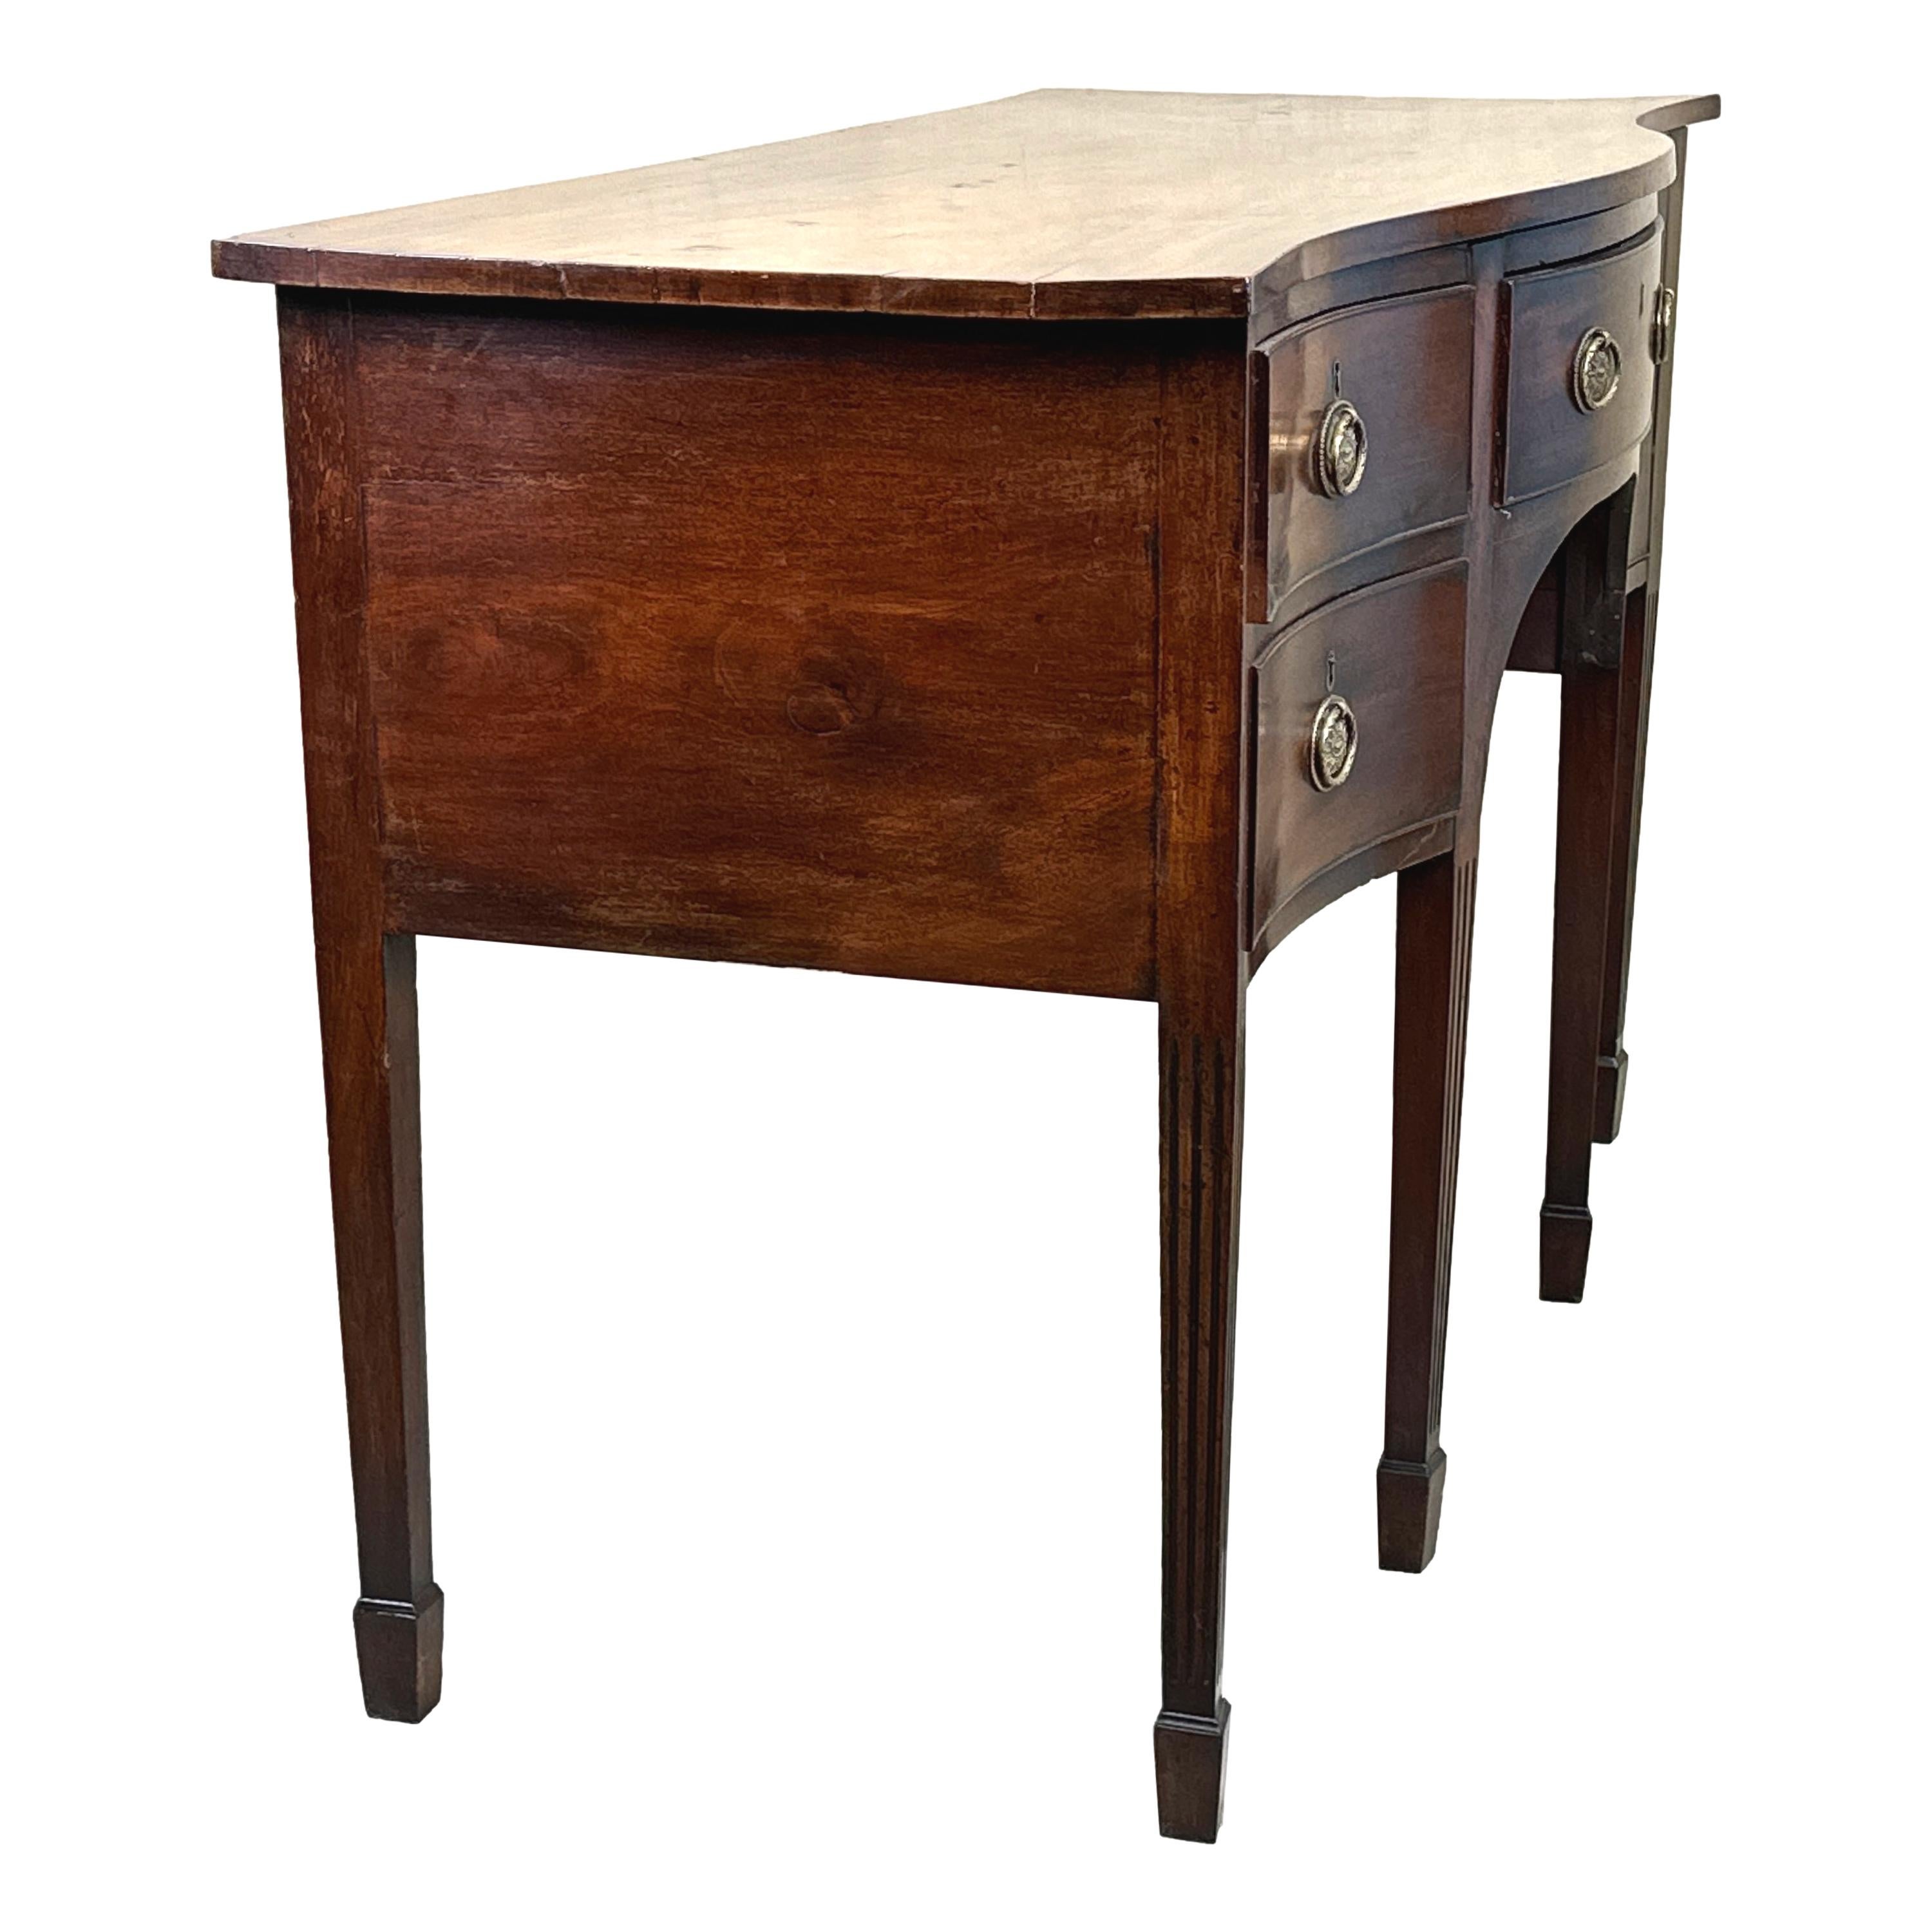 A Very Good Quality Late 18th Century, Georgian, mahogany Hepplewhite Period Serpentine Sideboard, Of Unusual Diminutive Proportions, Retaining Exceptional Colour And Patina Throughout, With Well Figured Top Over Four Drawers, Including One With